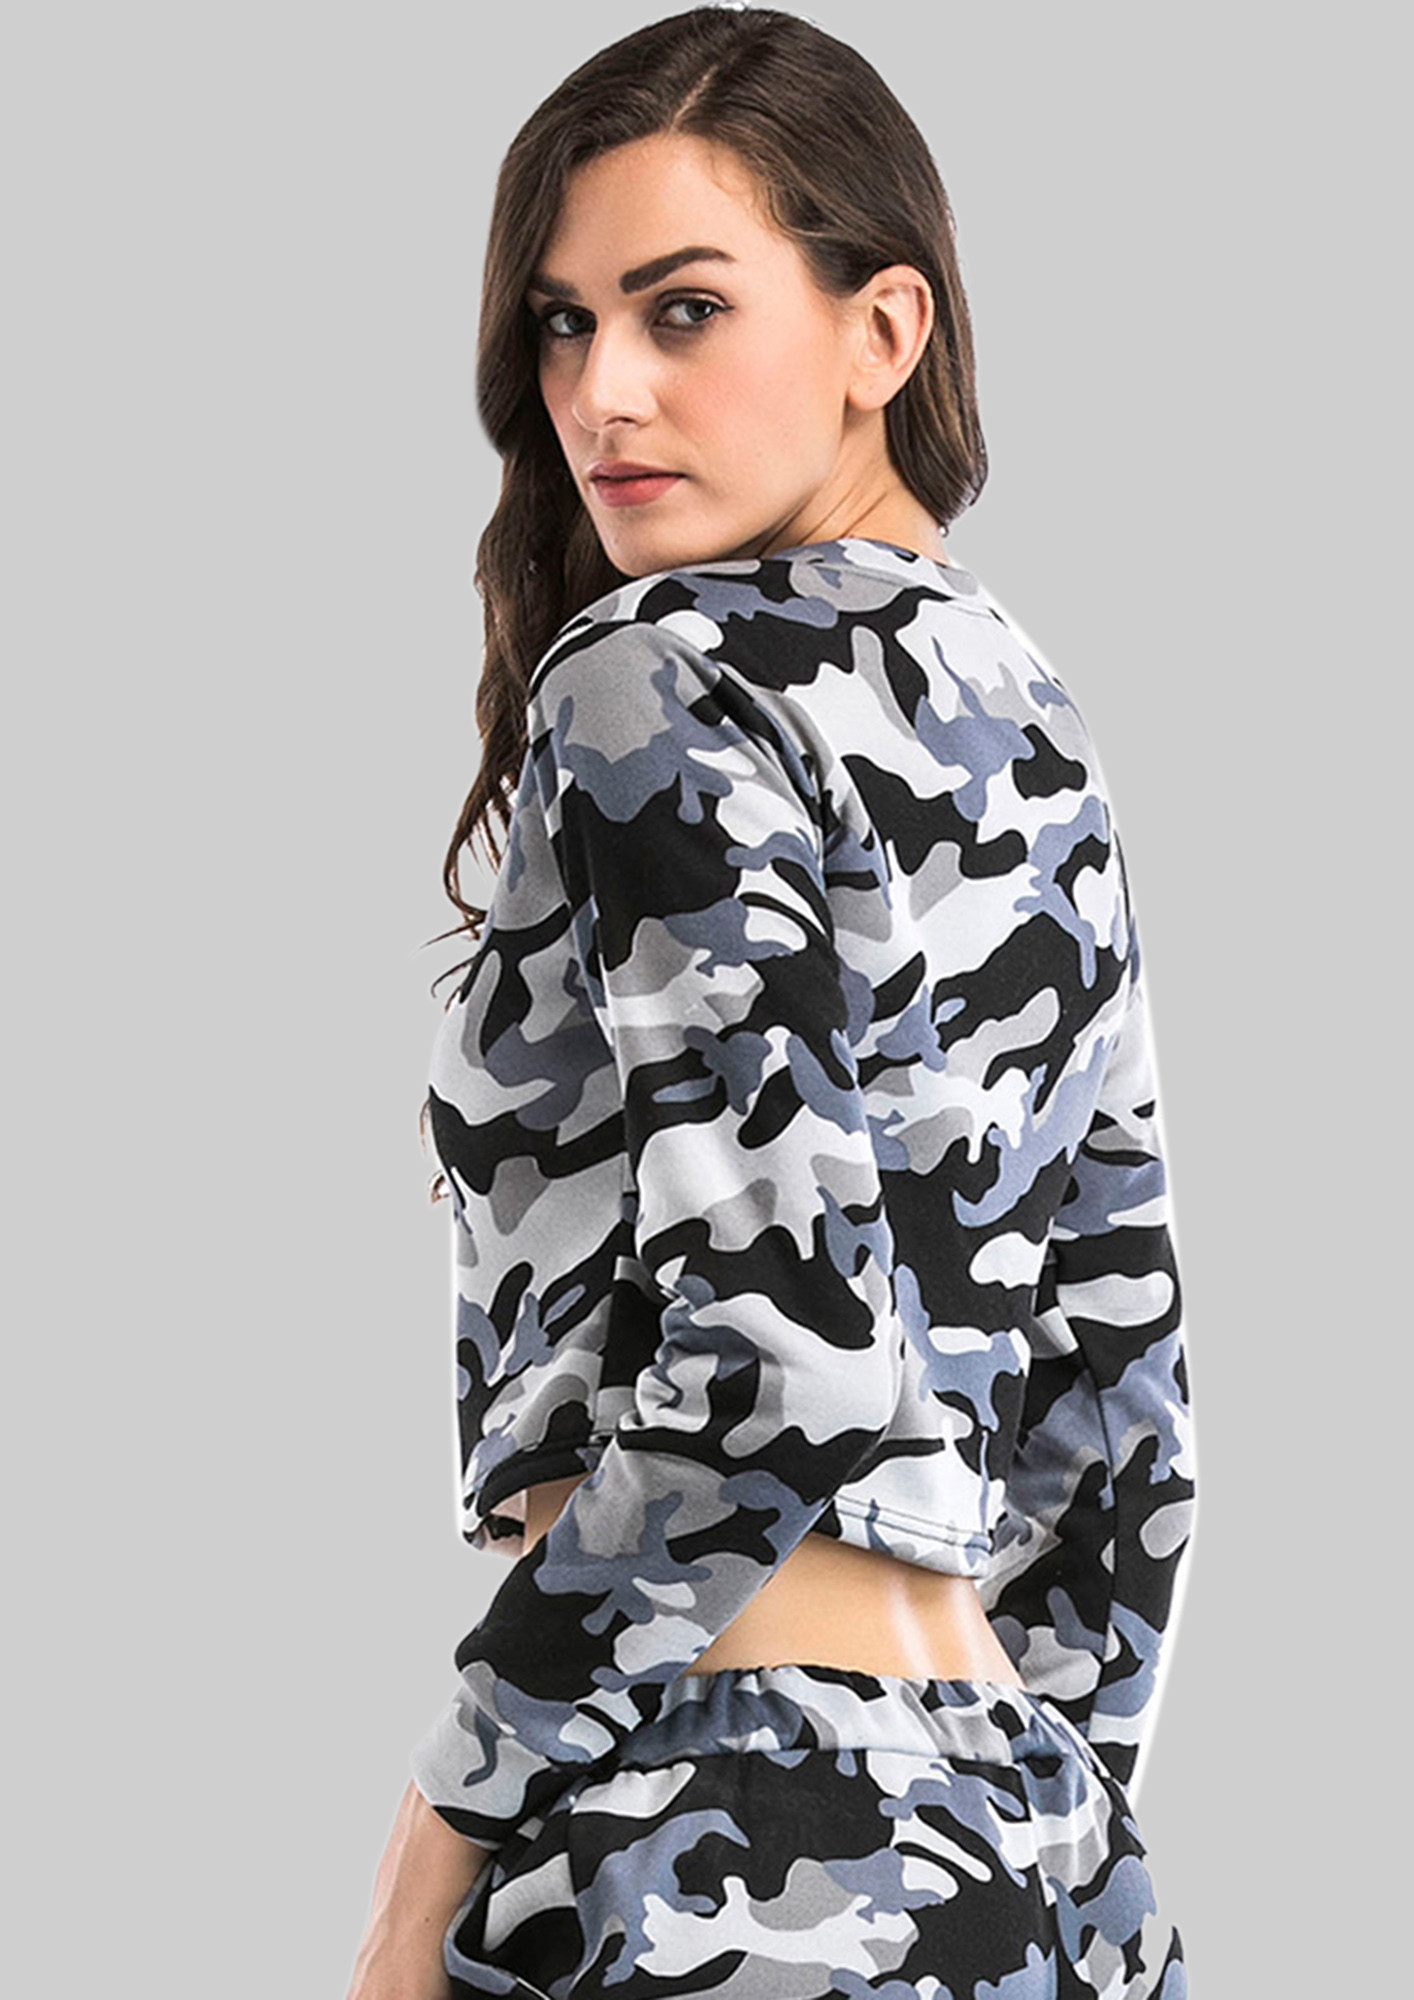 A CREW NECK PRINTED GREY RELAXED CROP TOP